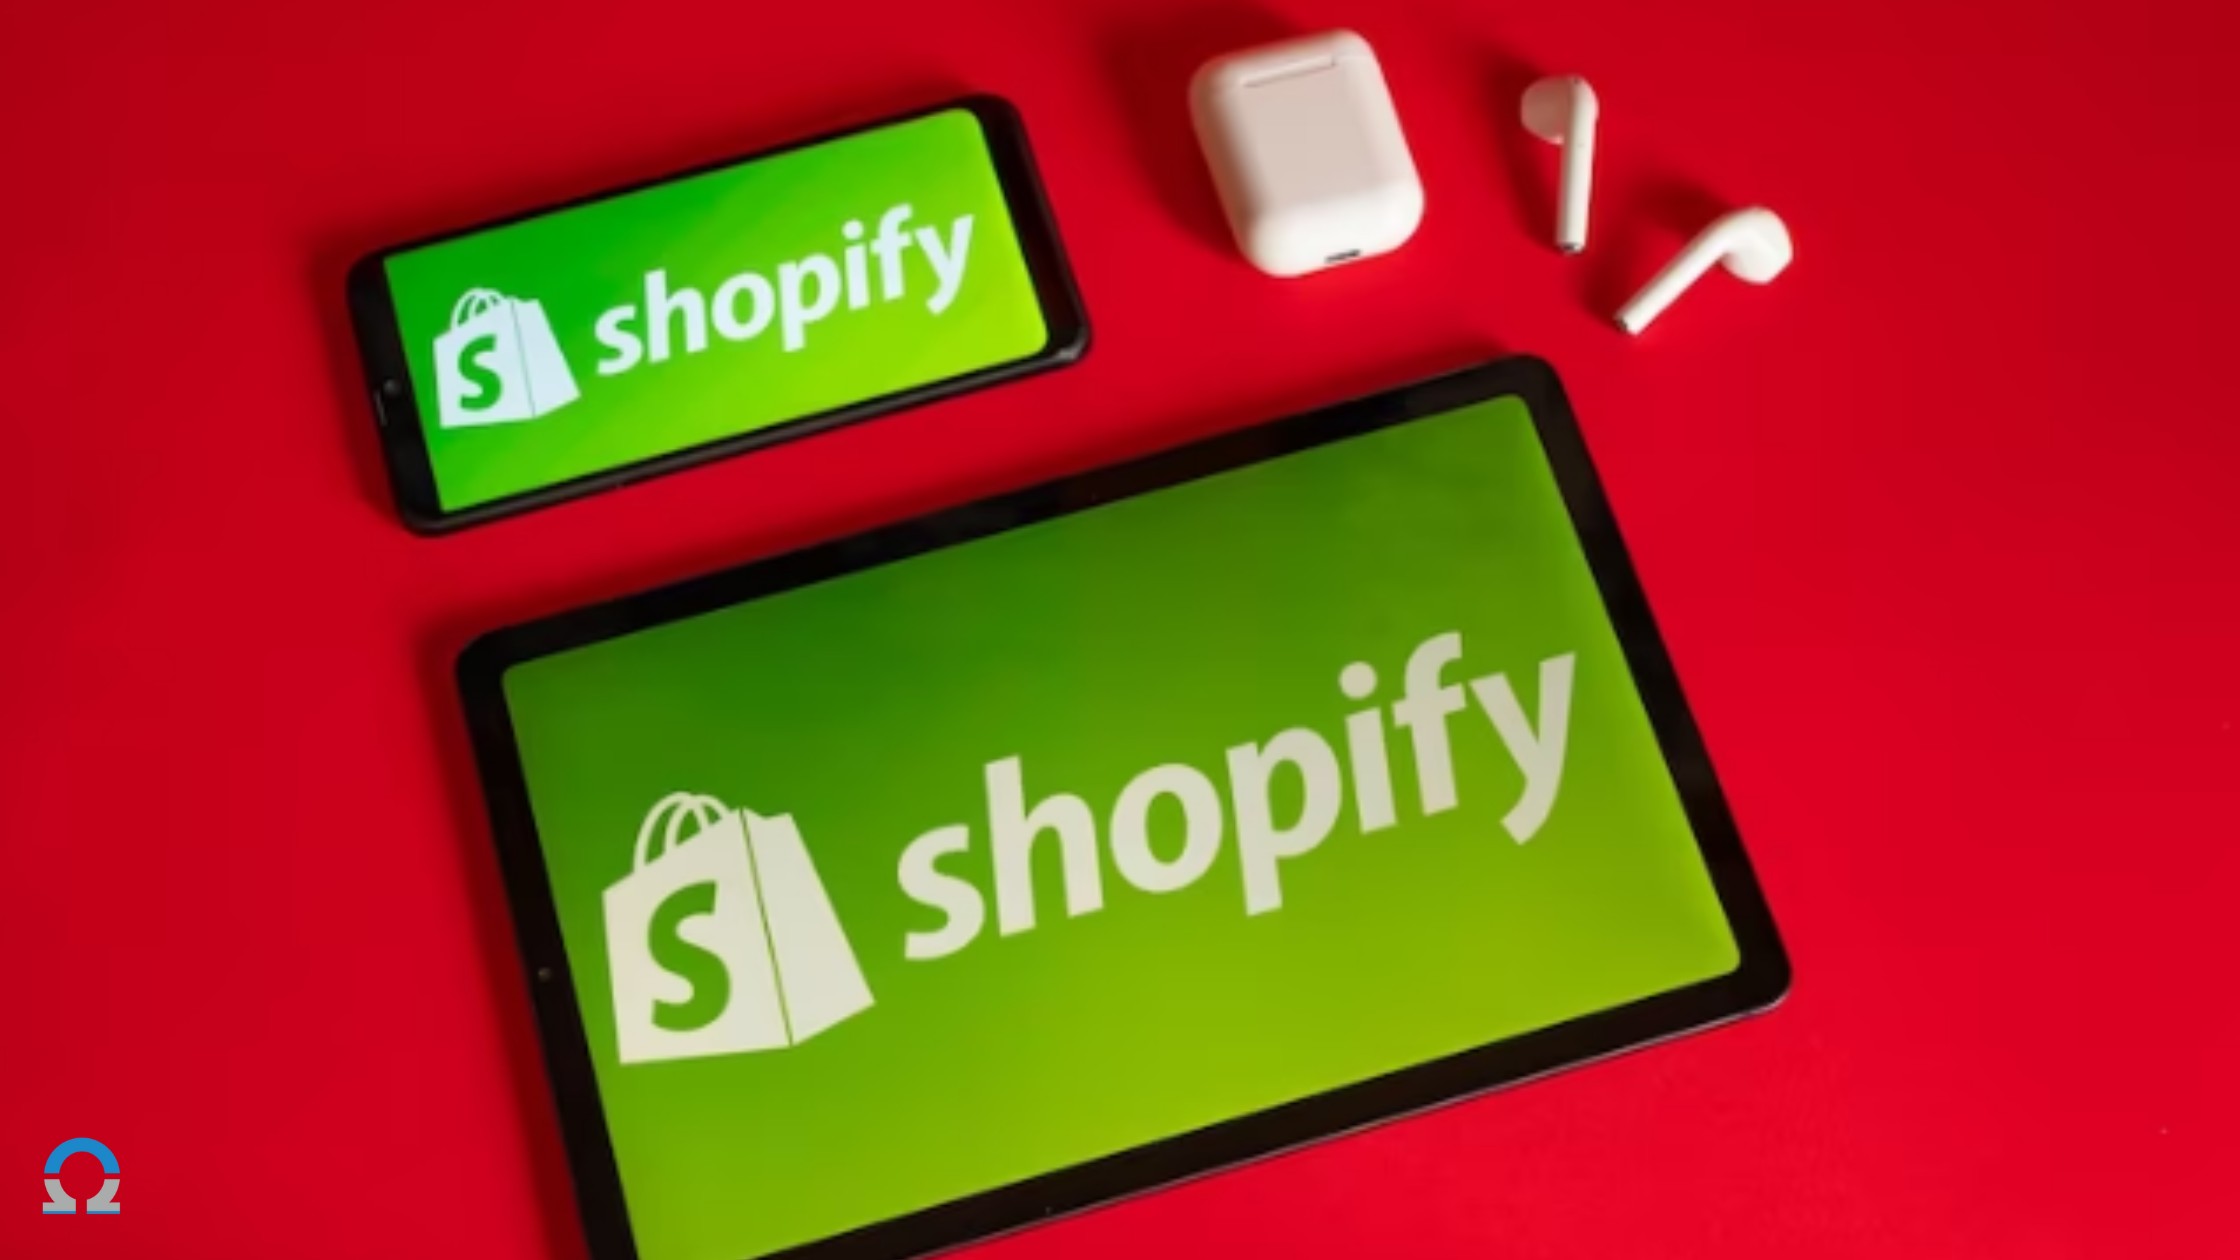 The Ultimate Guide to Building a Successful B2B Ecommerce
                      Brand on Shopify